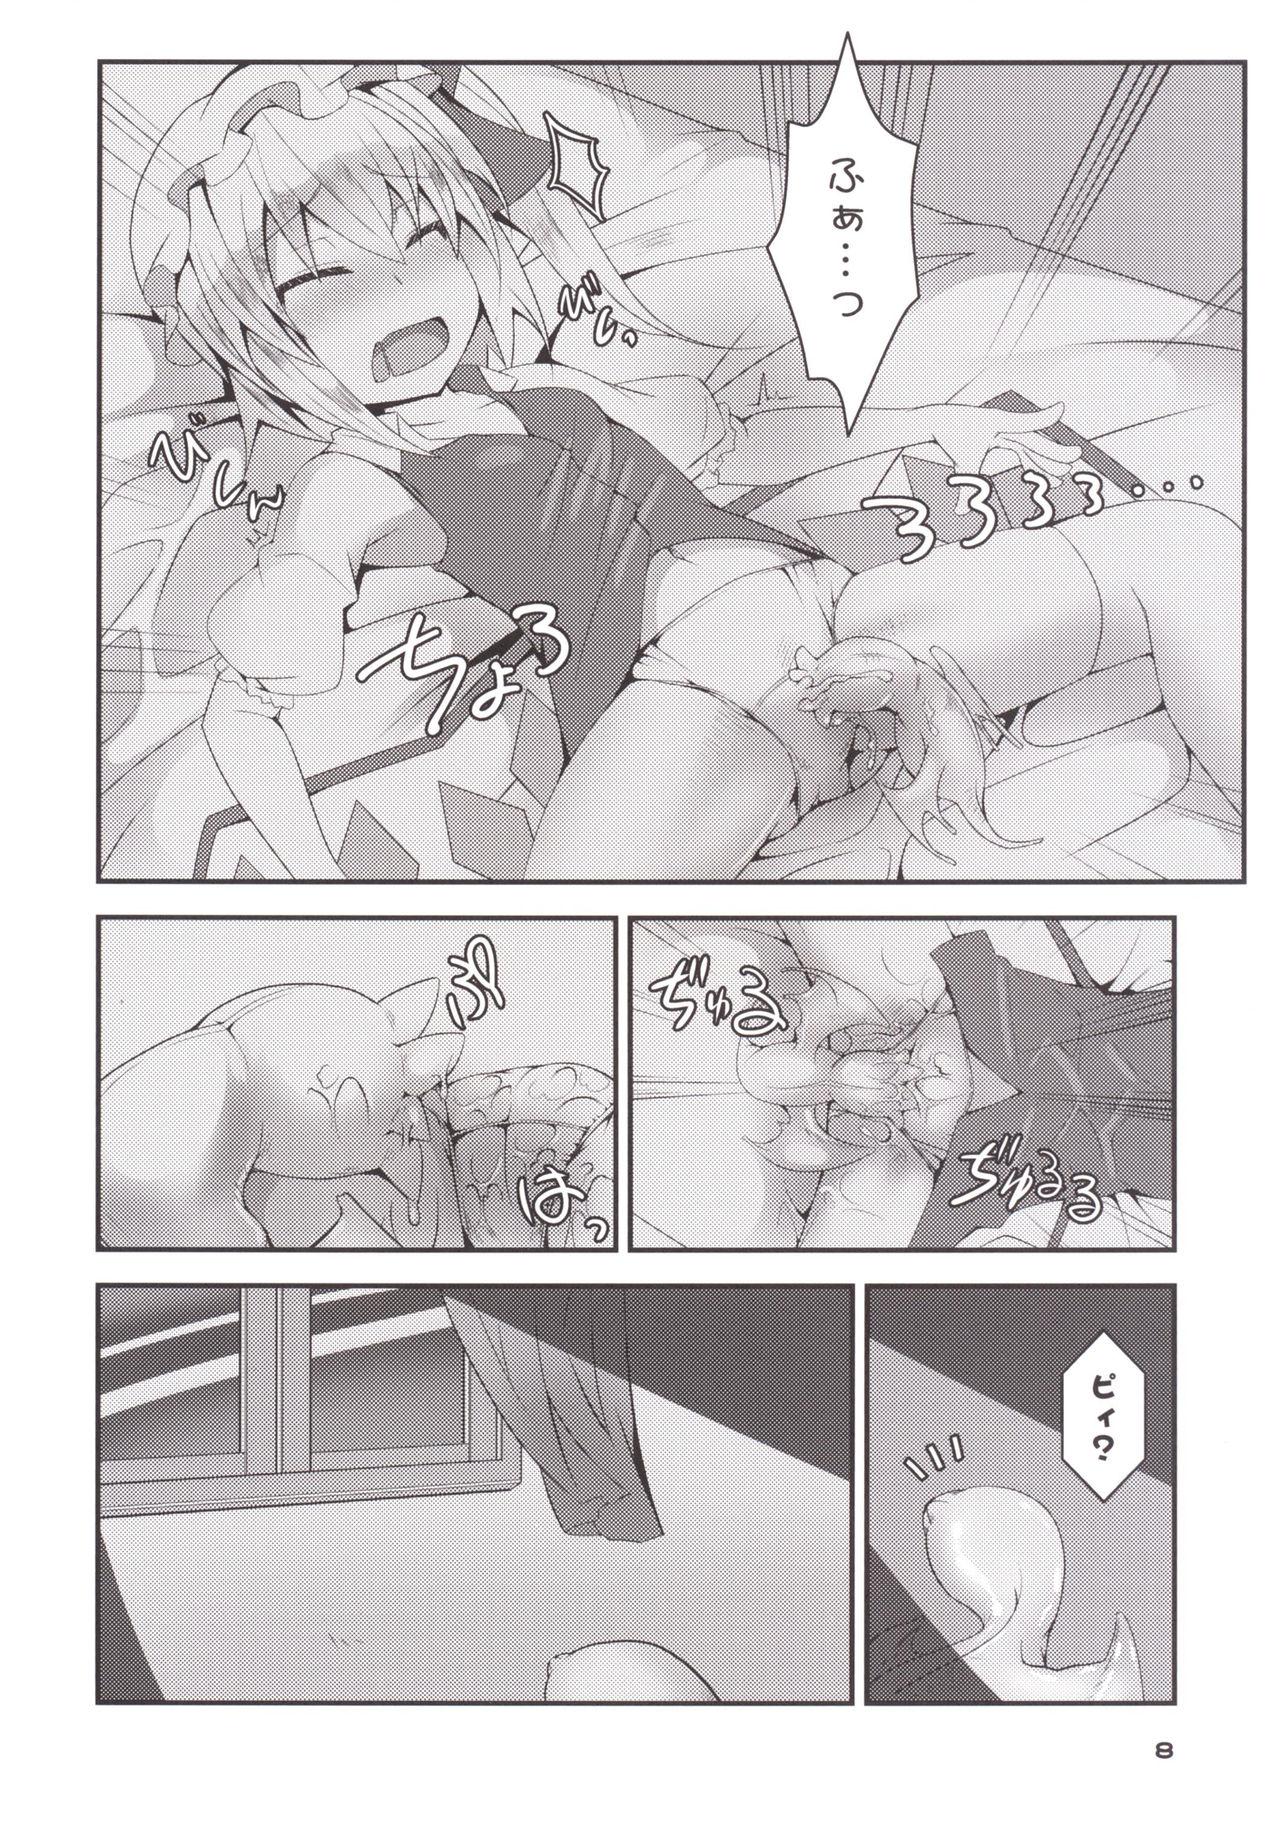 [Angelic Feather (Land Sale)] Otimpo Hunter Flandle (Touhou Project) [Digital] page 7 full